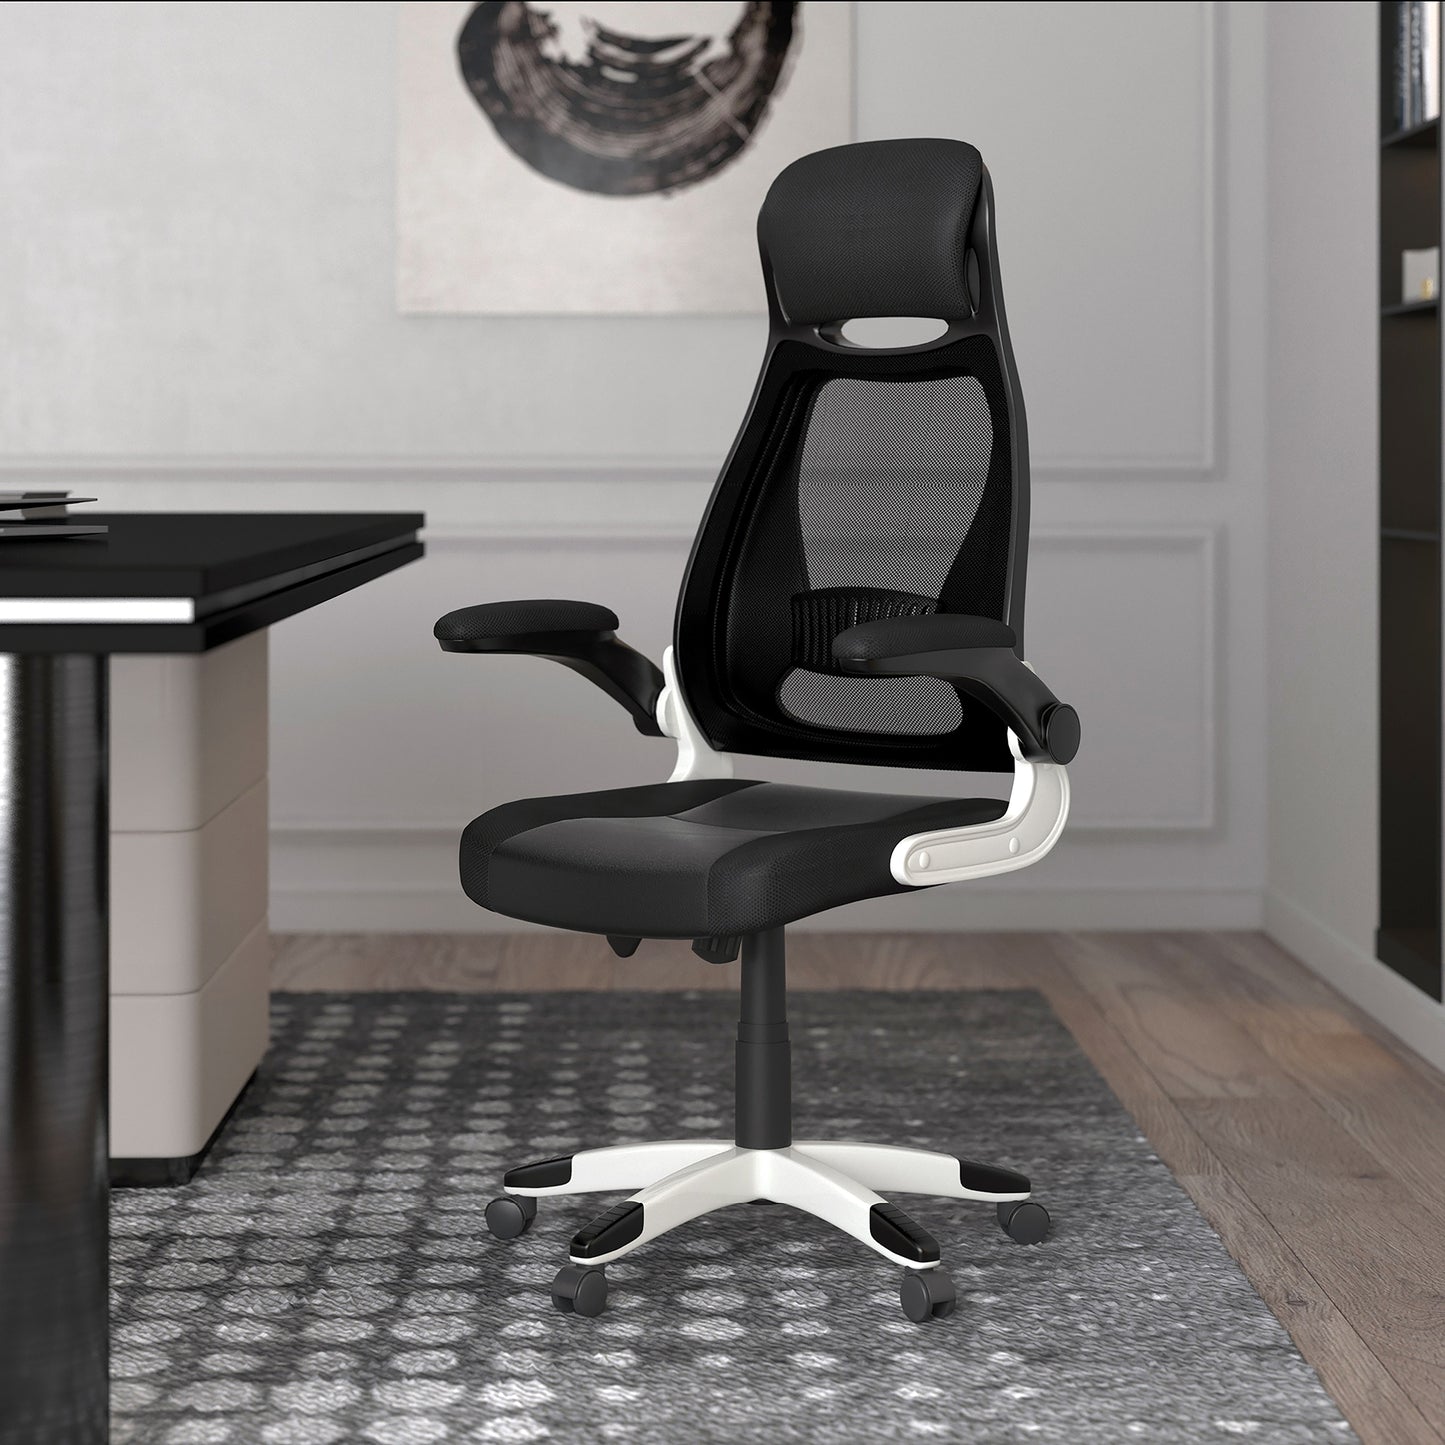 (FIGO BLACK)- LEATHER- COMPUTER/ GAMING CHAIR